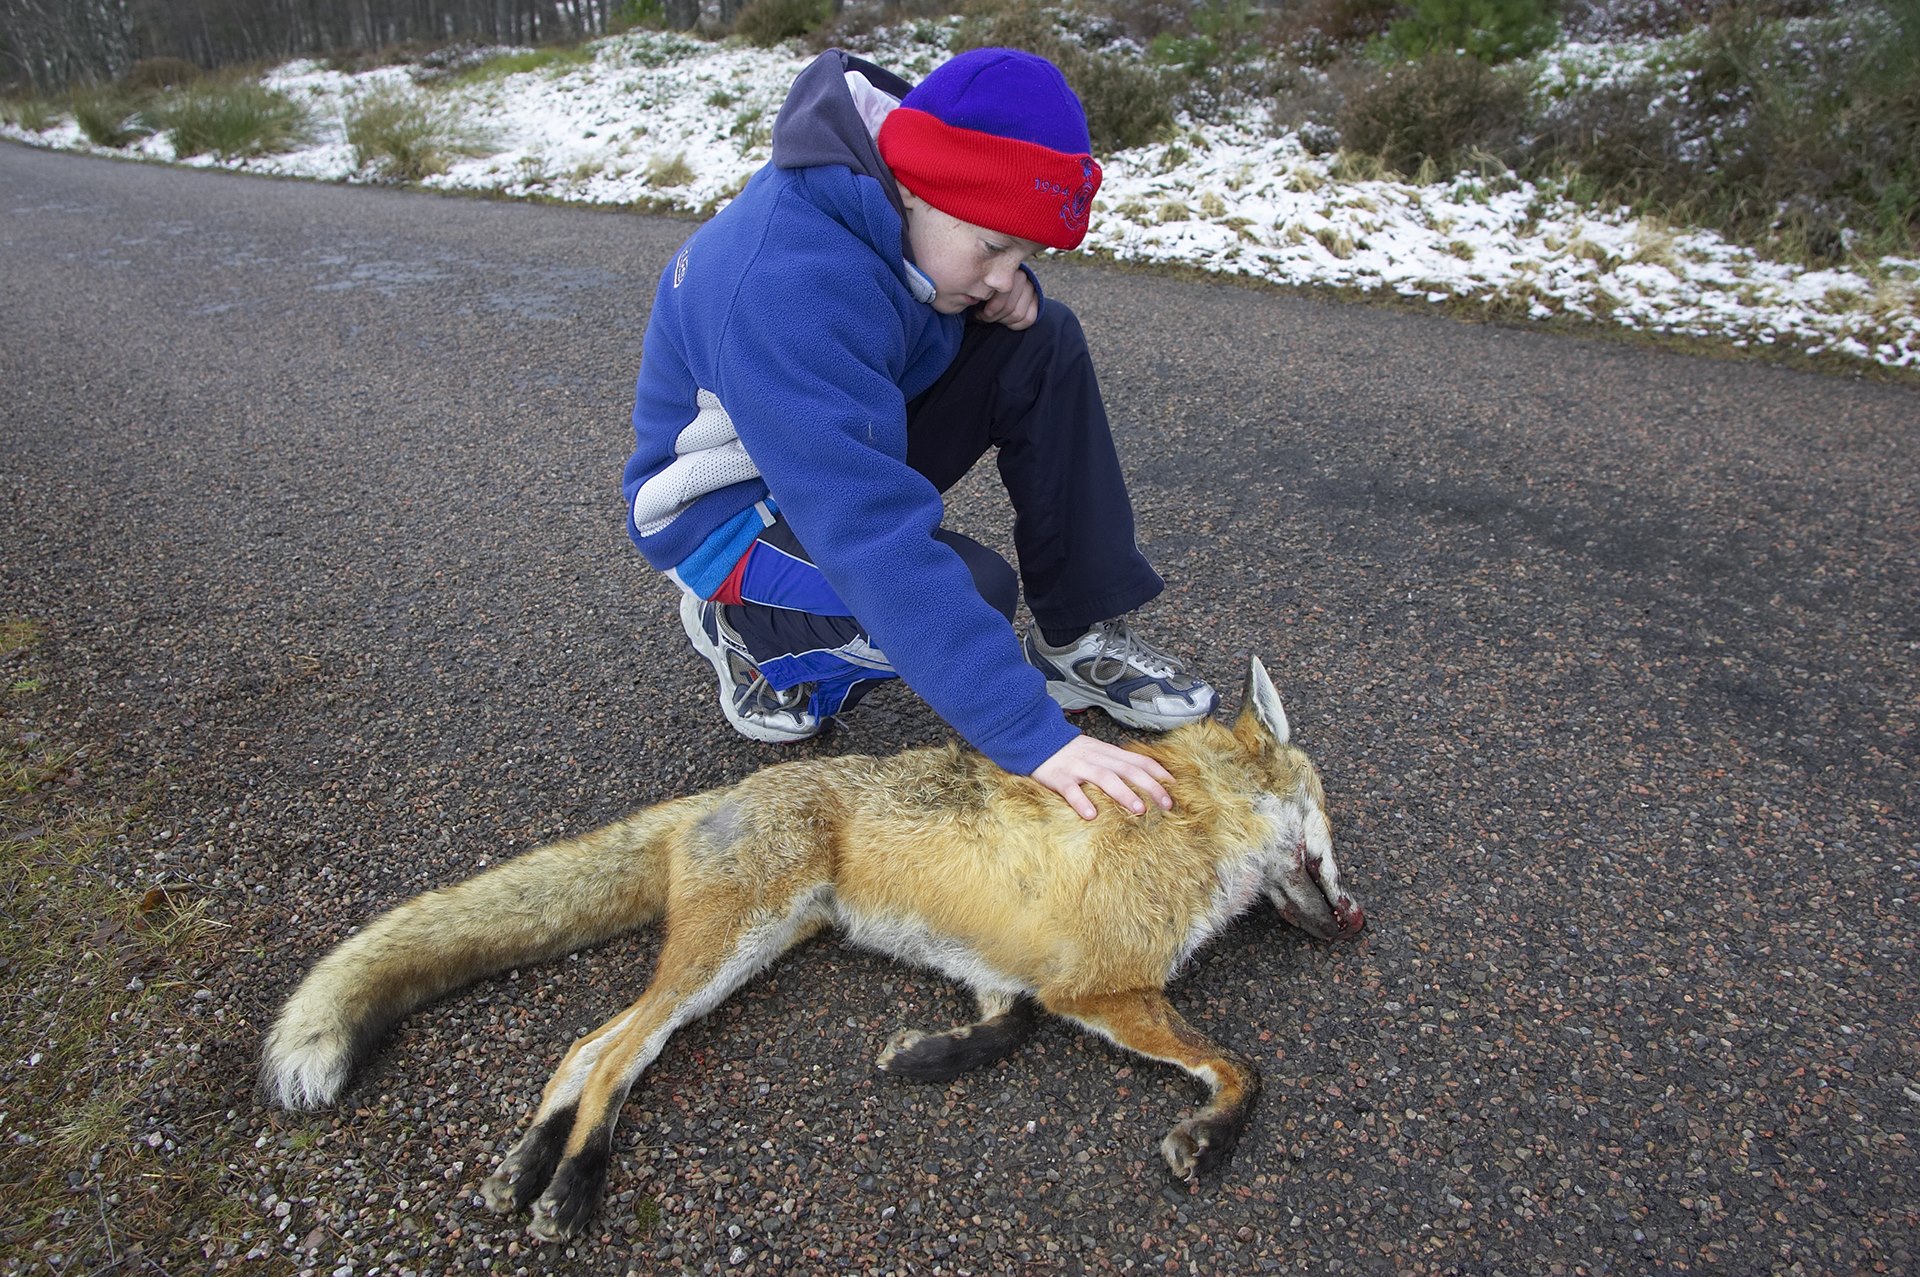 Red fox (vulpes vulpes) dead on road with child looking on, Scotland.